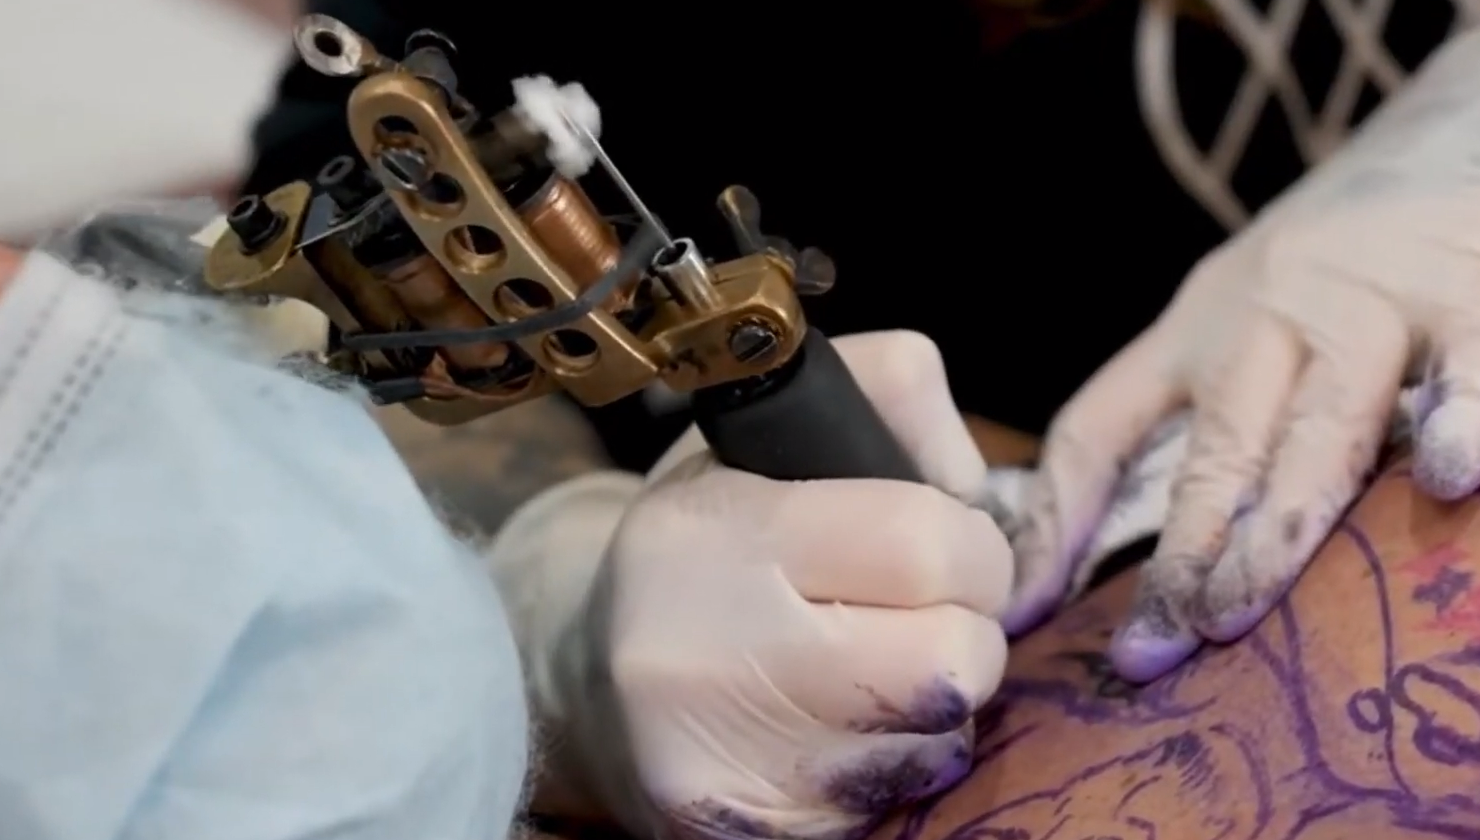 Do you pay before or after a tattoo?